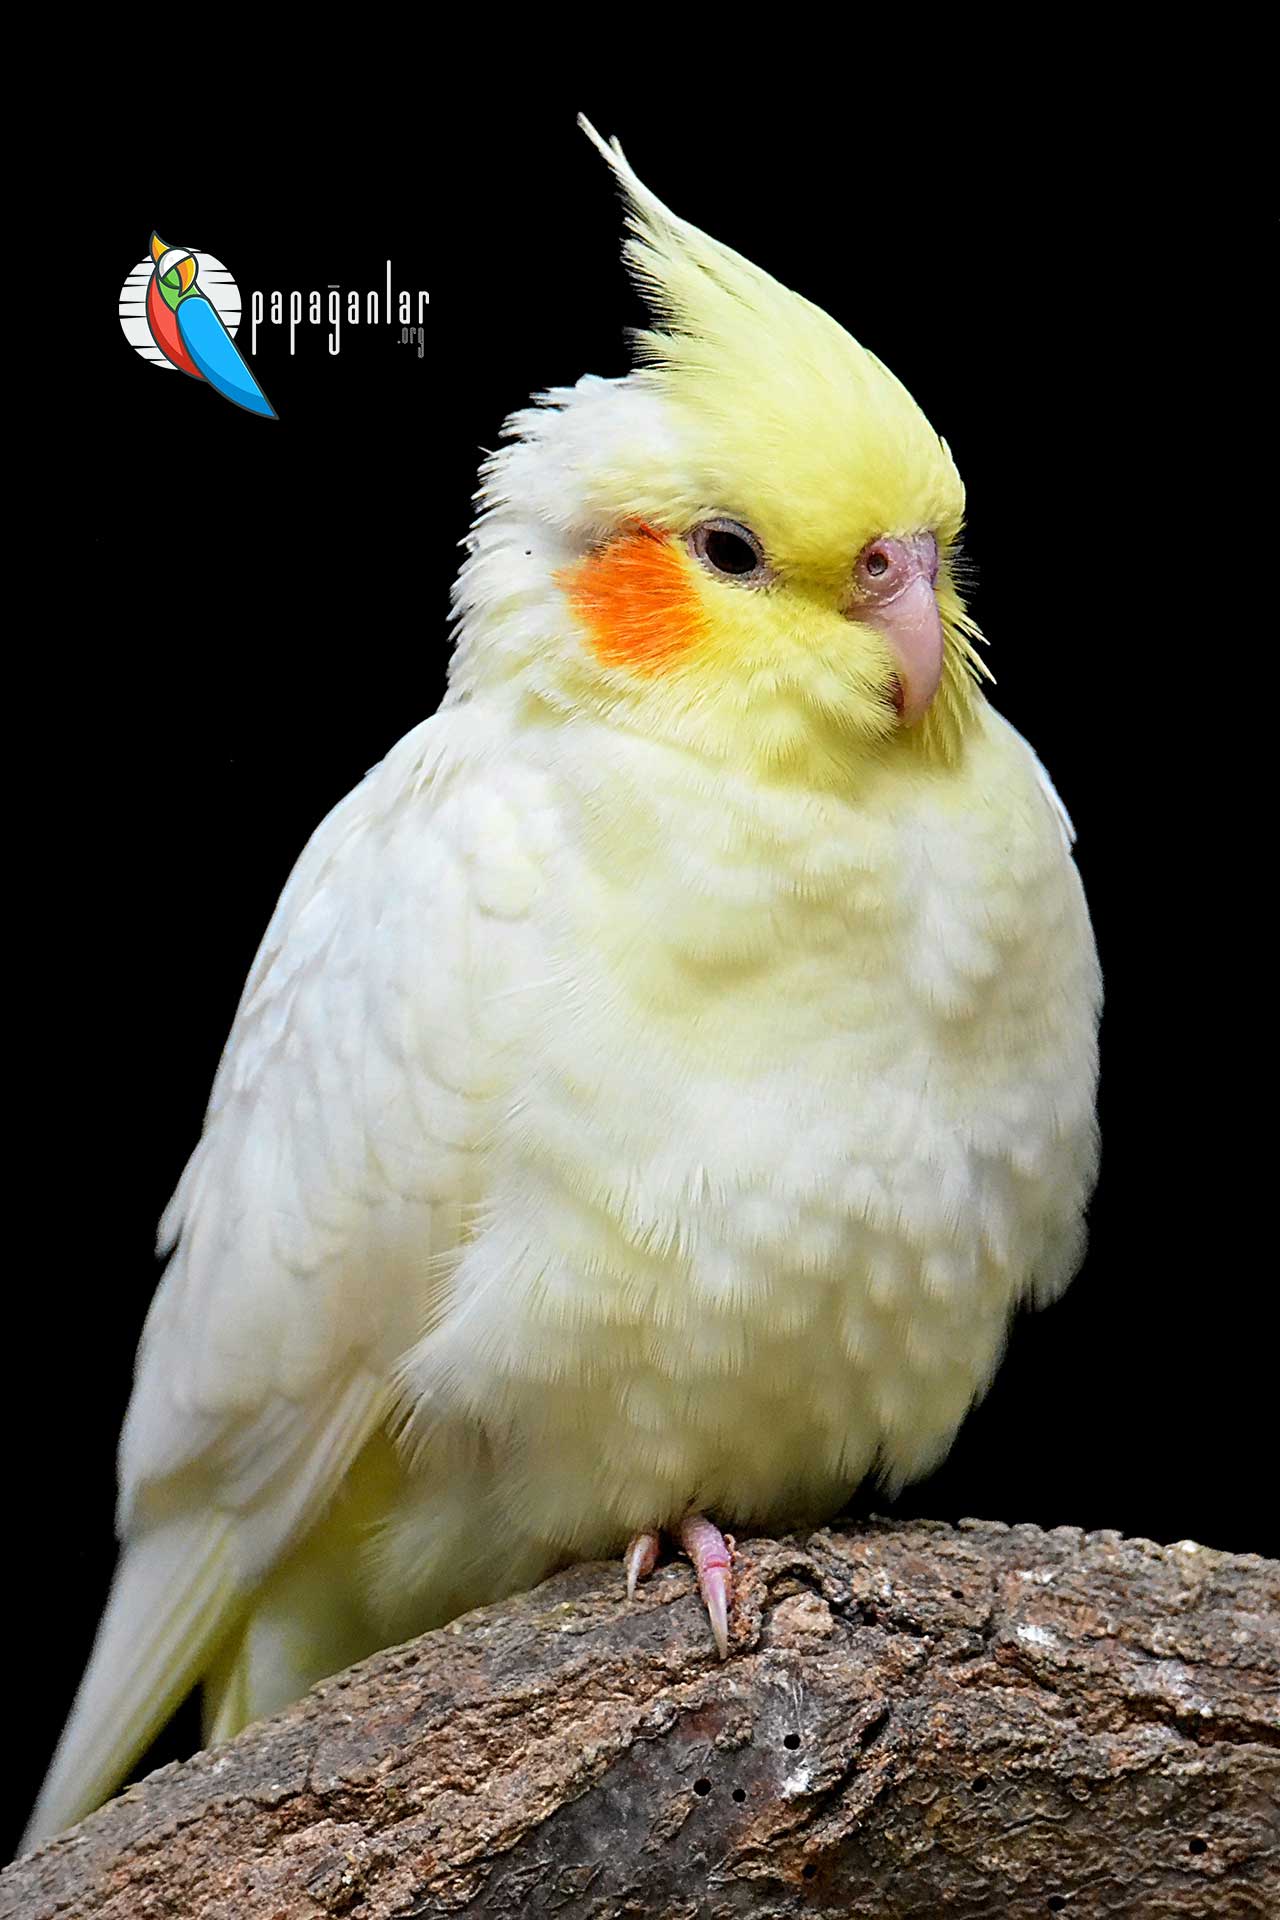 Cockatiel Parrot price from the owner